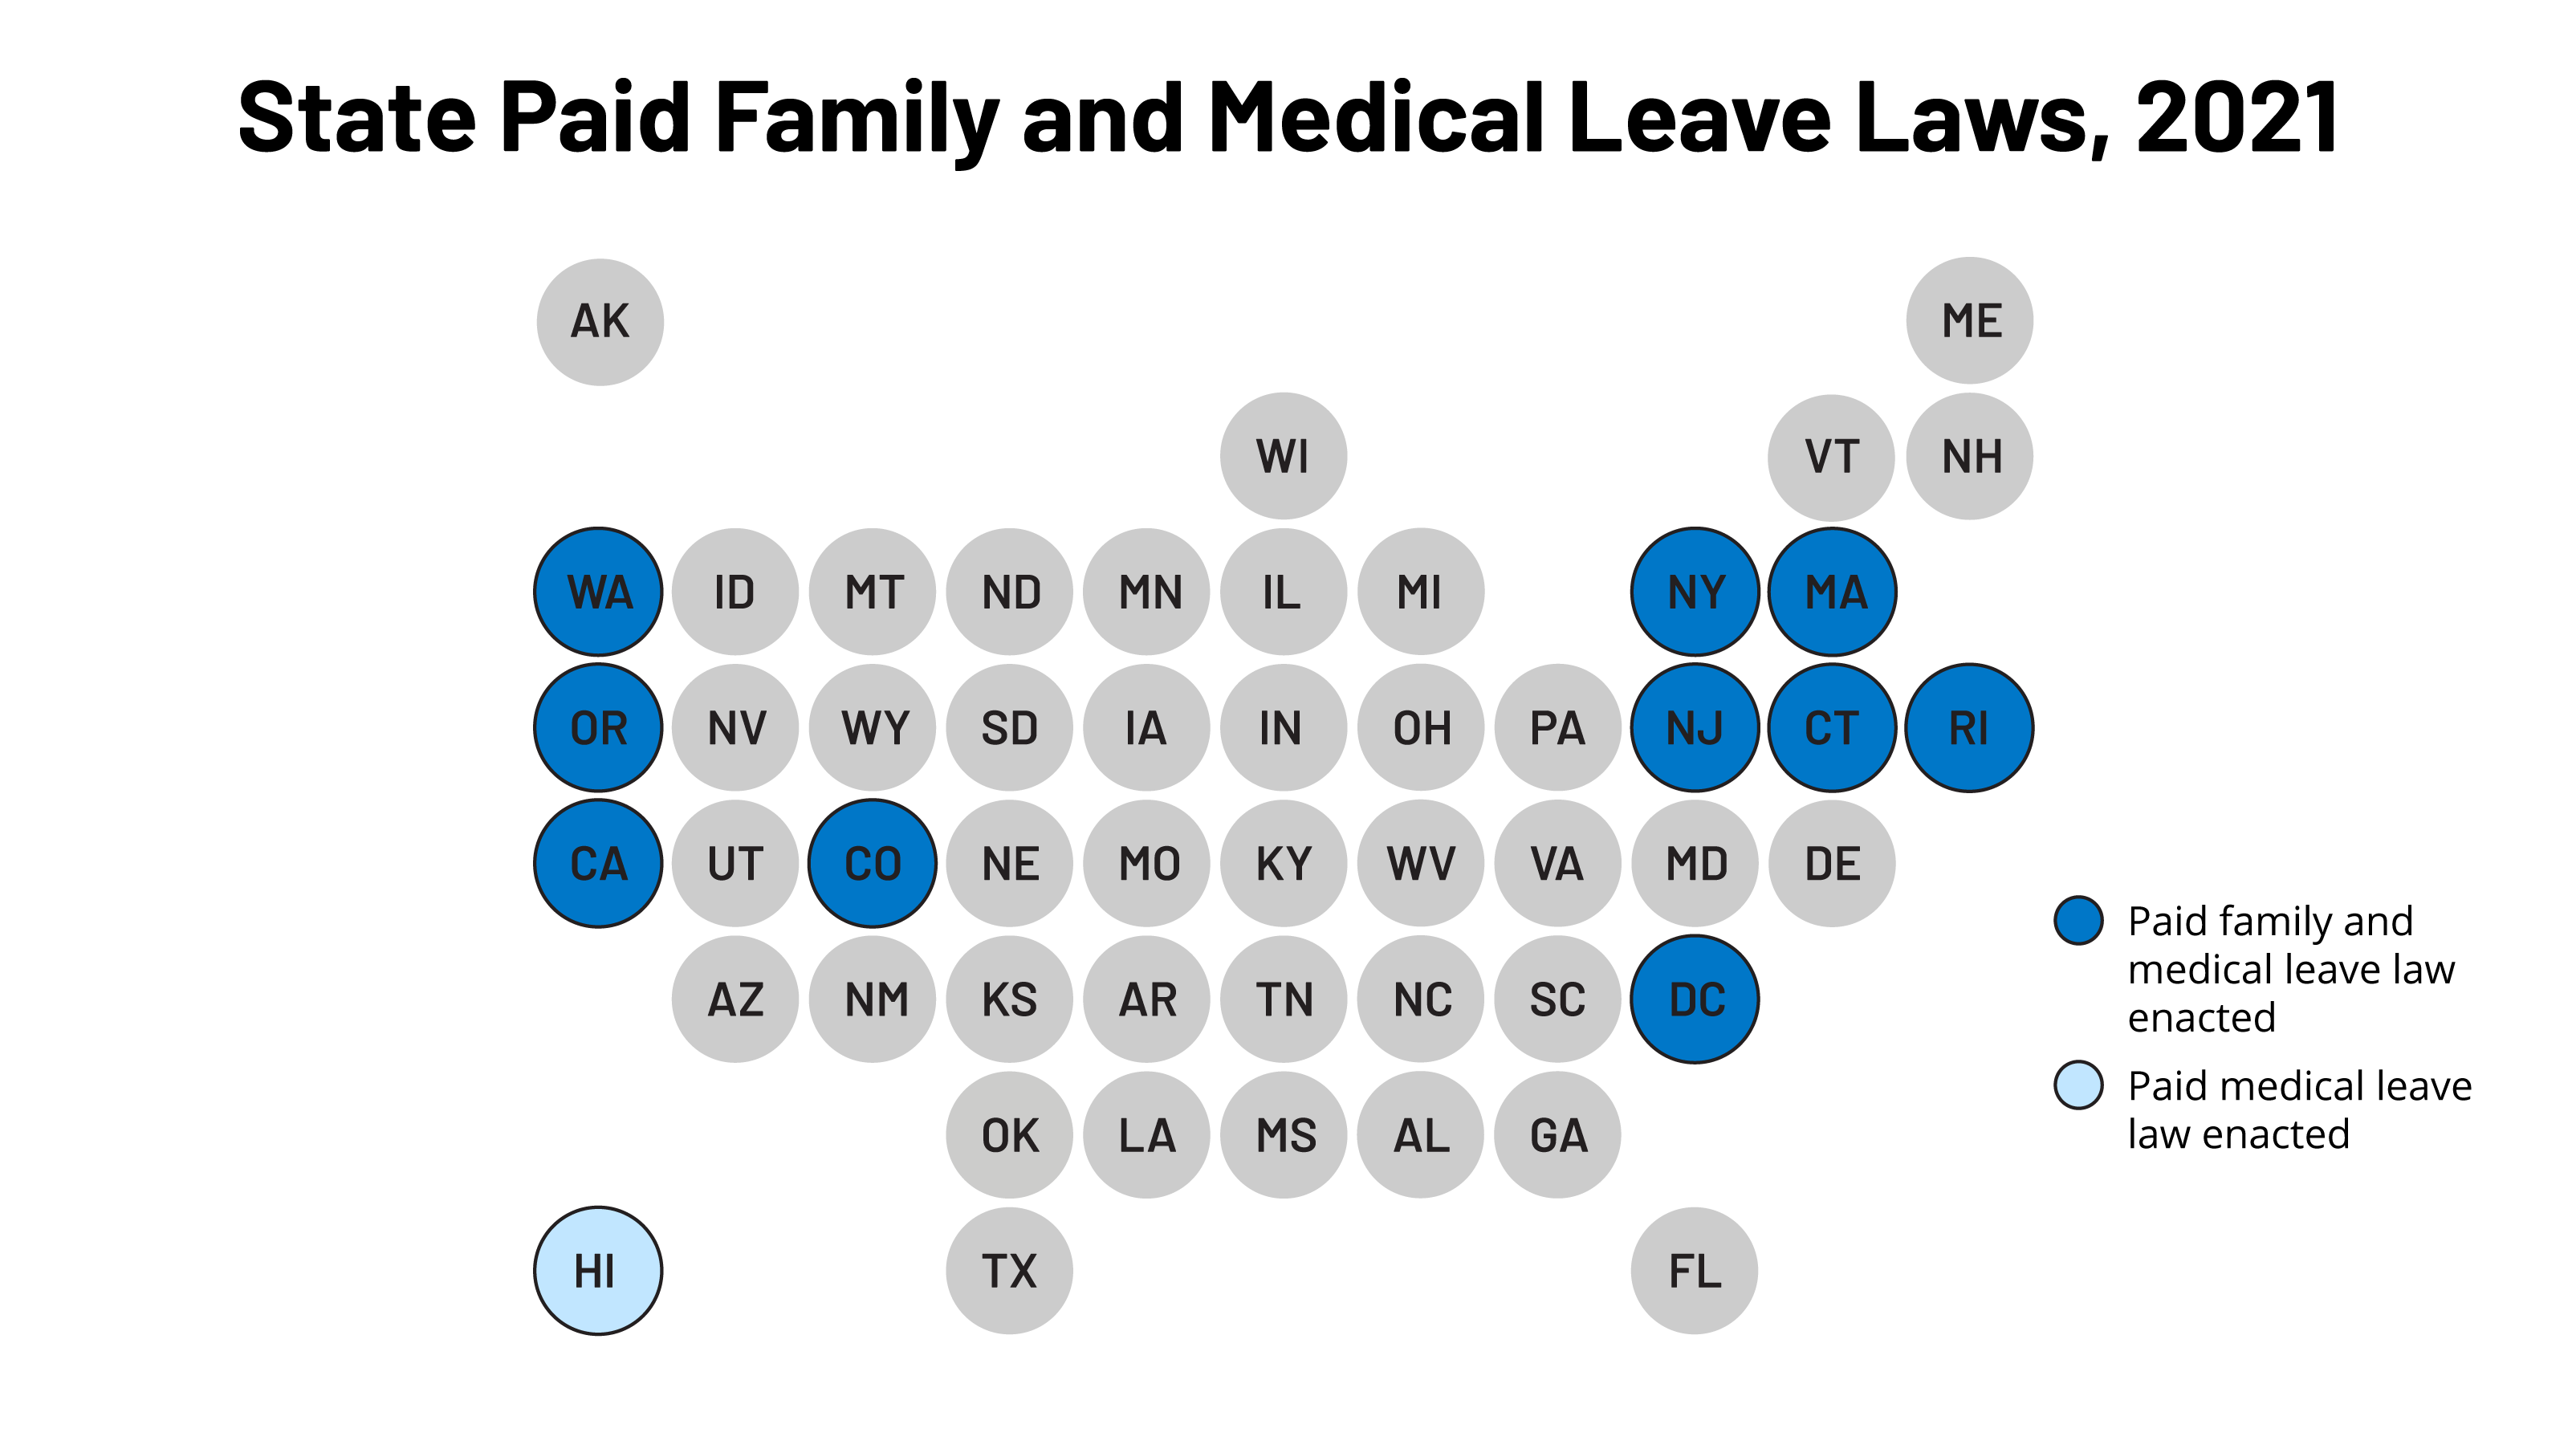 The sequence of coverage expansion of paid maternity leave